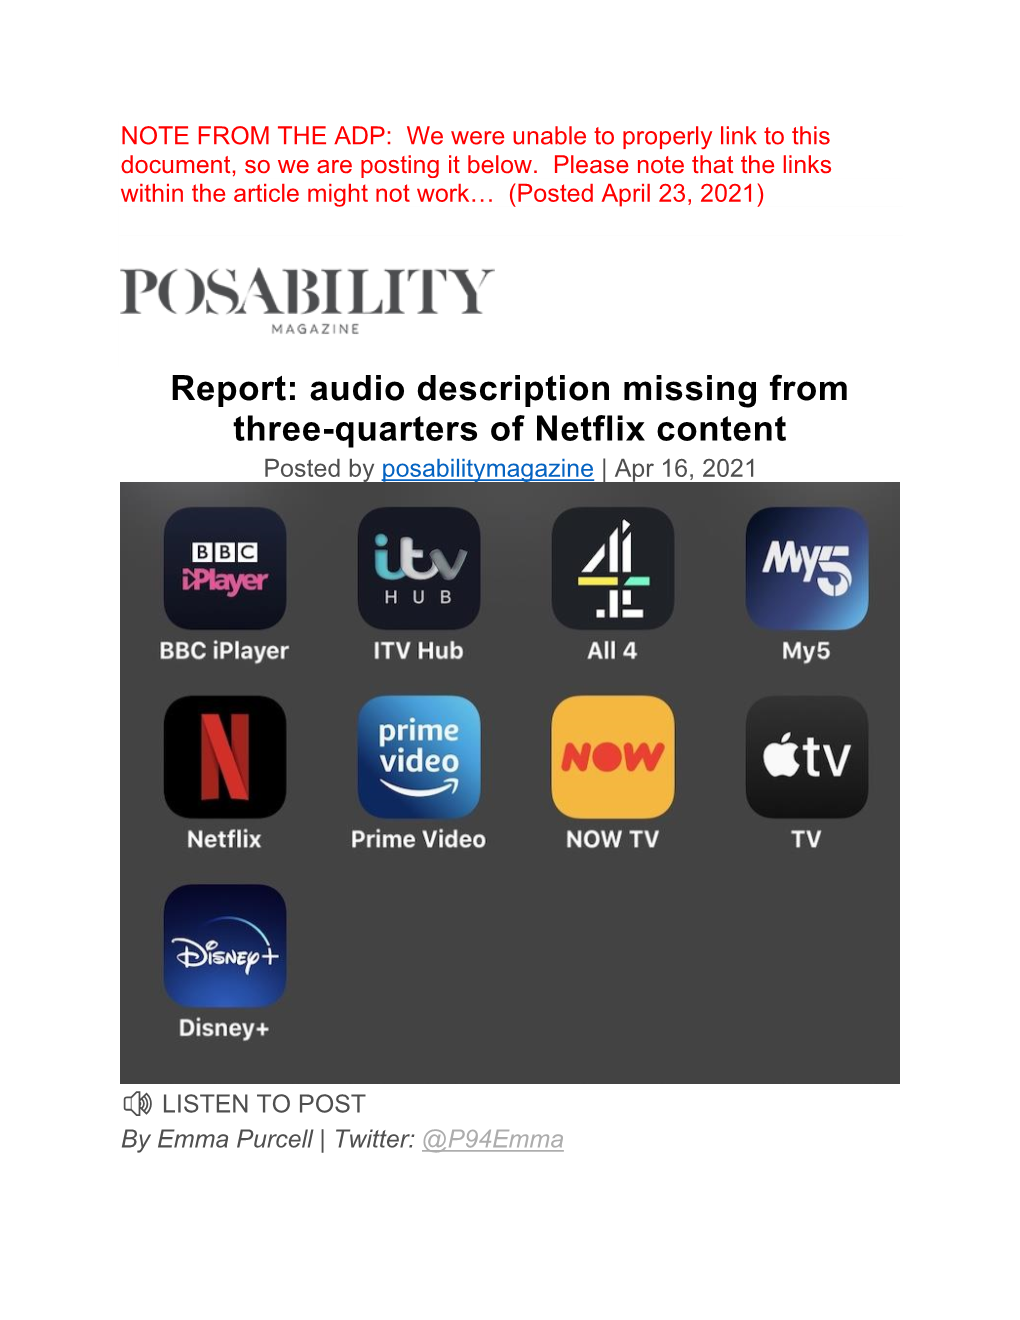 Report: Audio Description Missing from Three-Quarters of Netflix Content Posted by Posabilitymagazine | Apr 16, 2021